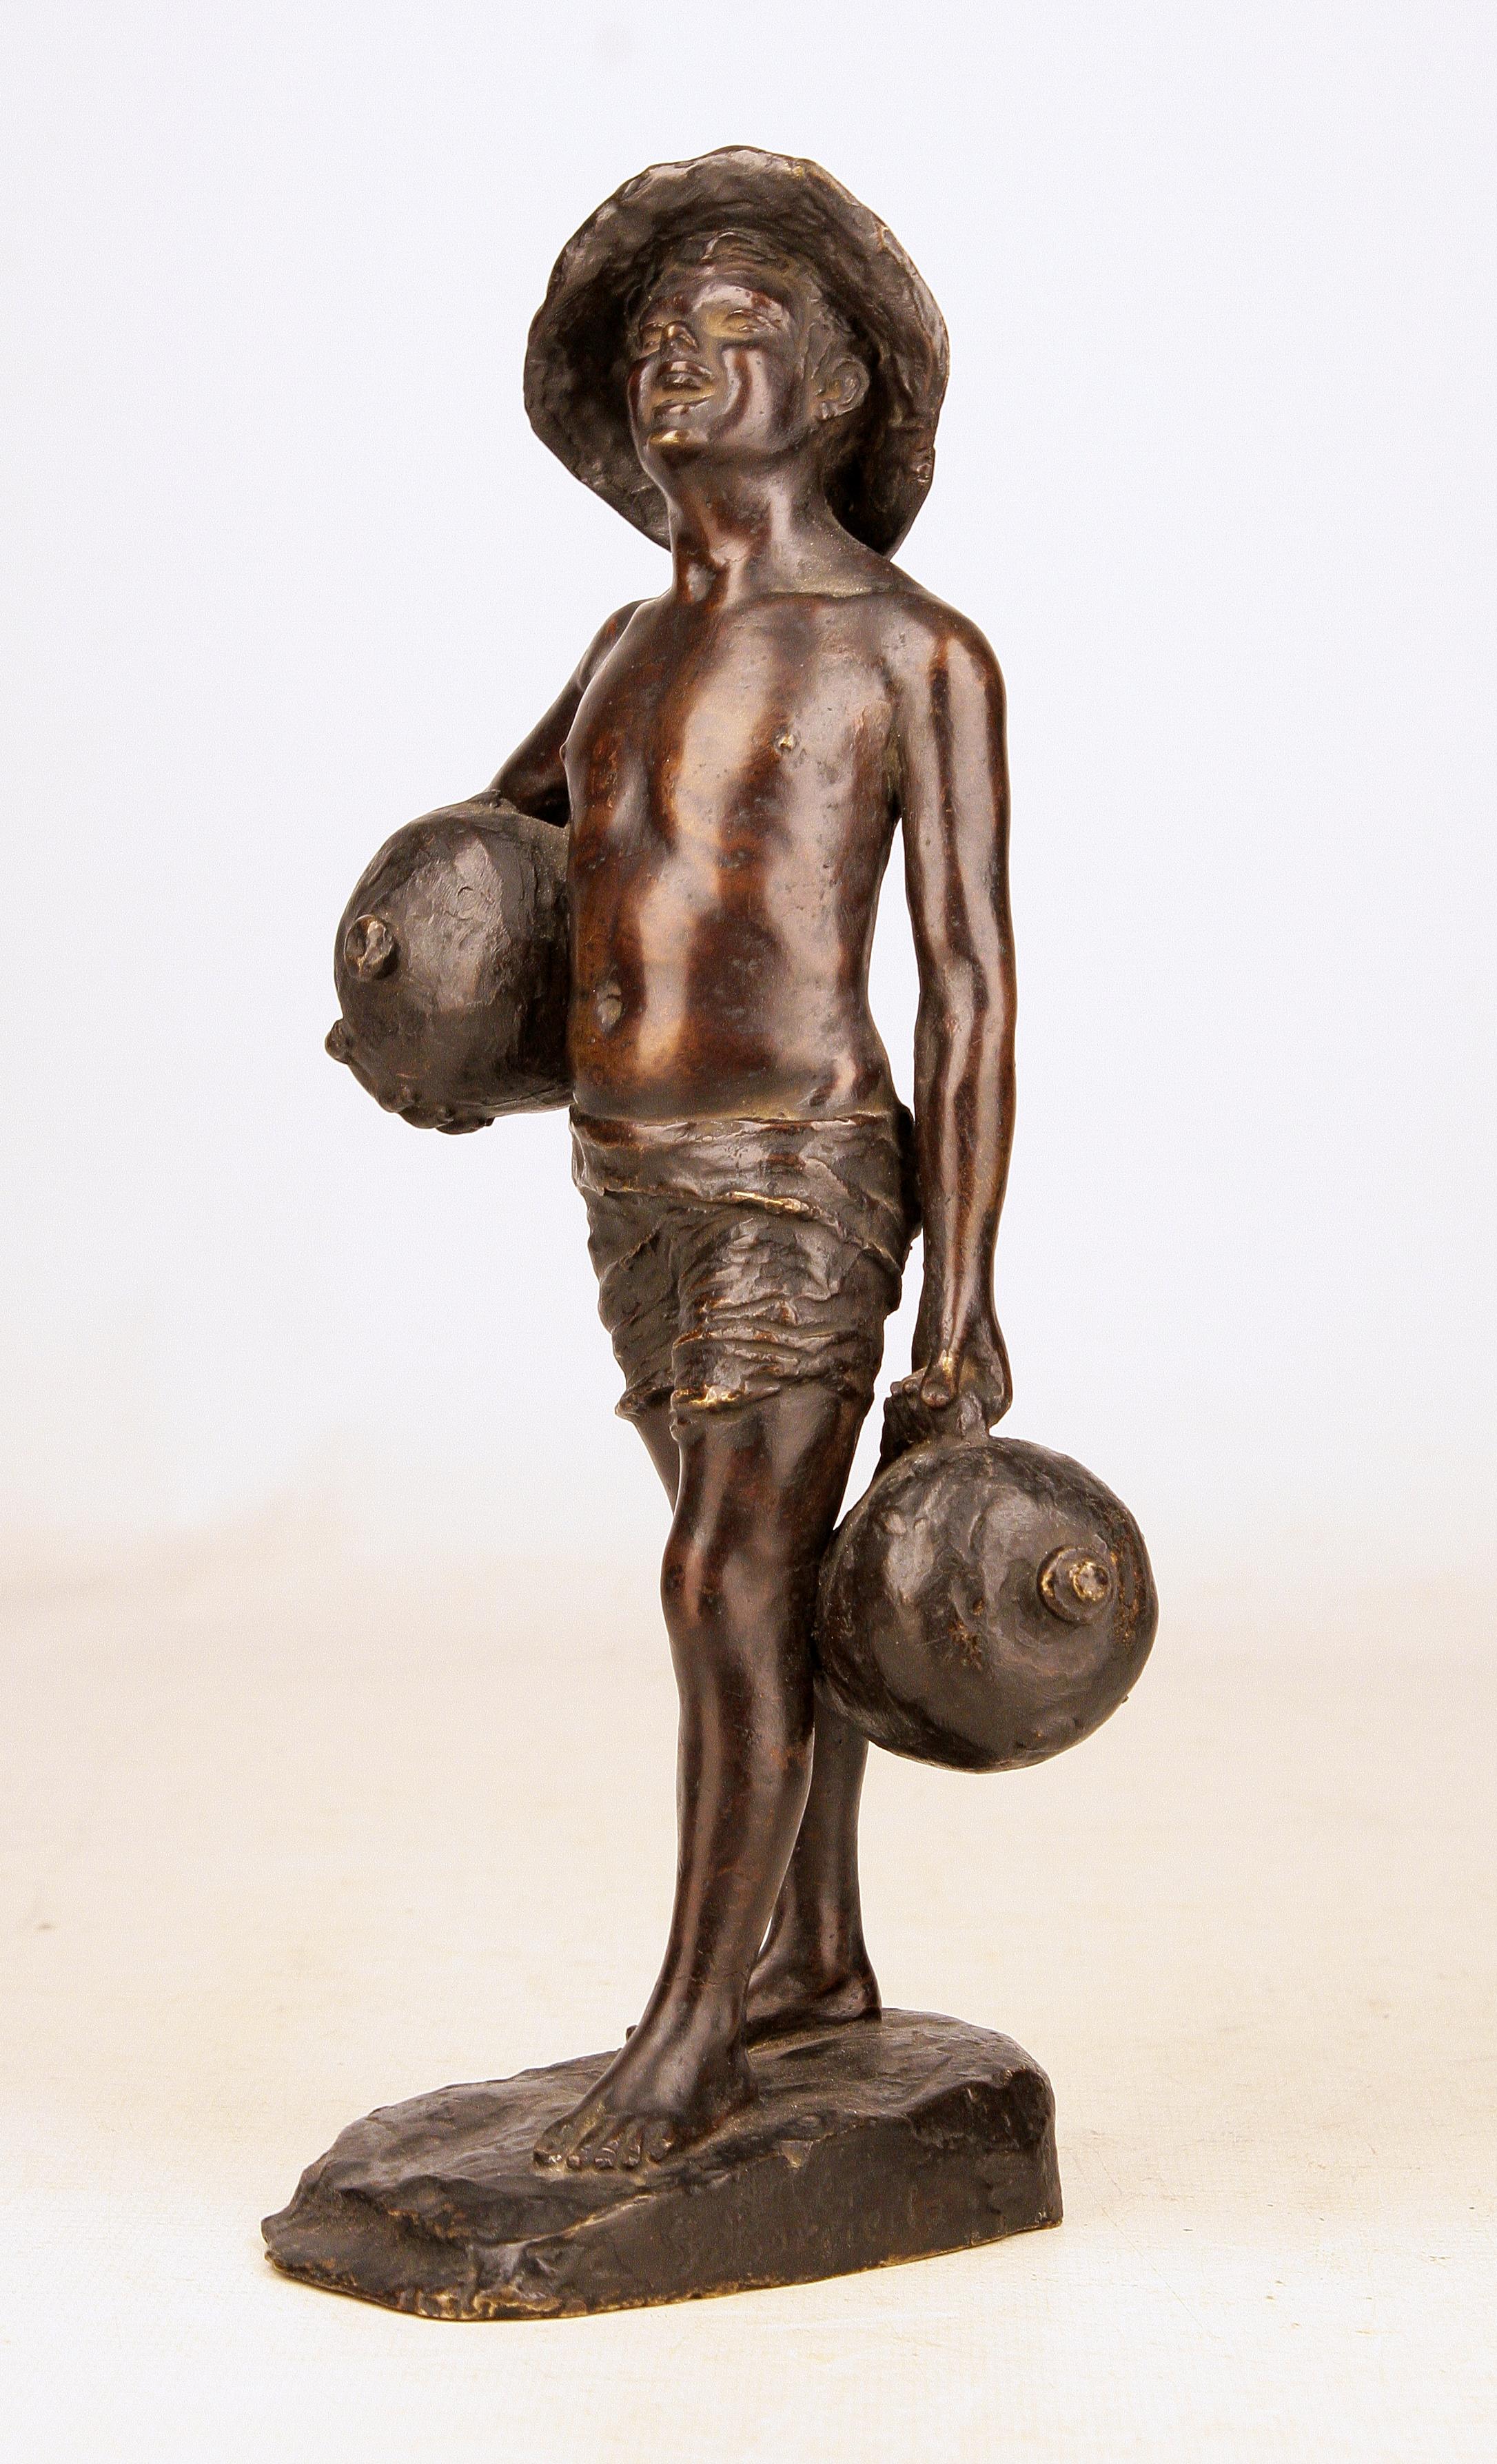 Patinated bronze sculpture of boy holding jugs signed by italian G. Borriello

By: G. Borriello
Material: copper, bronze, metal
Technique: cast, molded, patinated, metalwork
Dimensions: 5 in x 6 in x 11 in
Date: late 19th century
Style: Belle